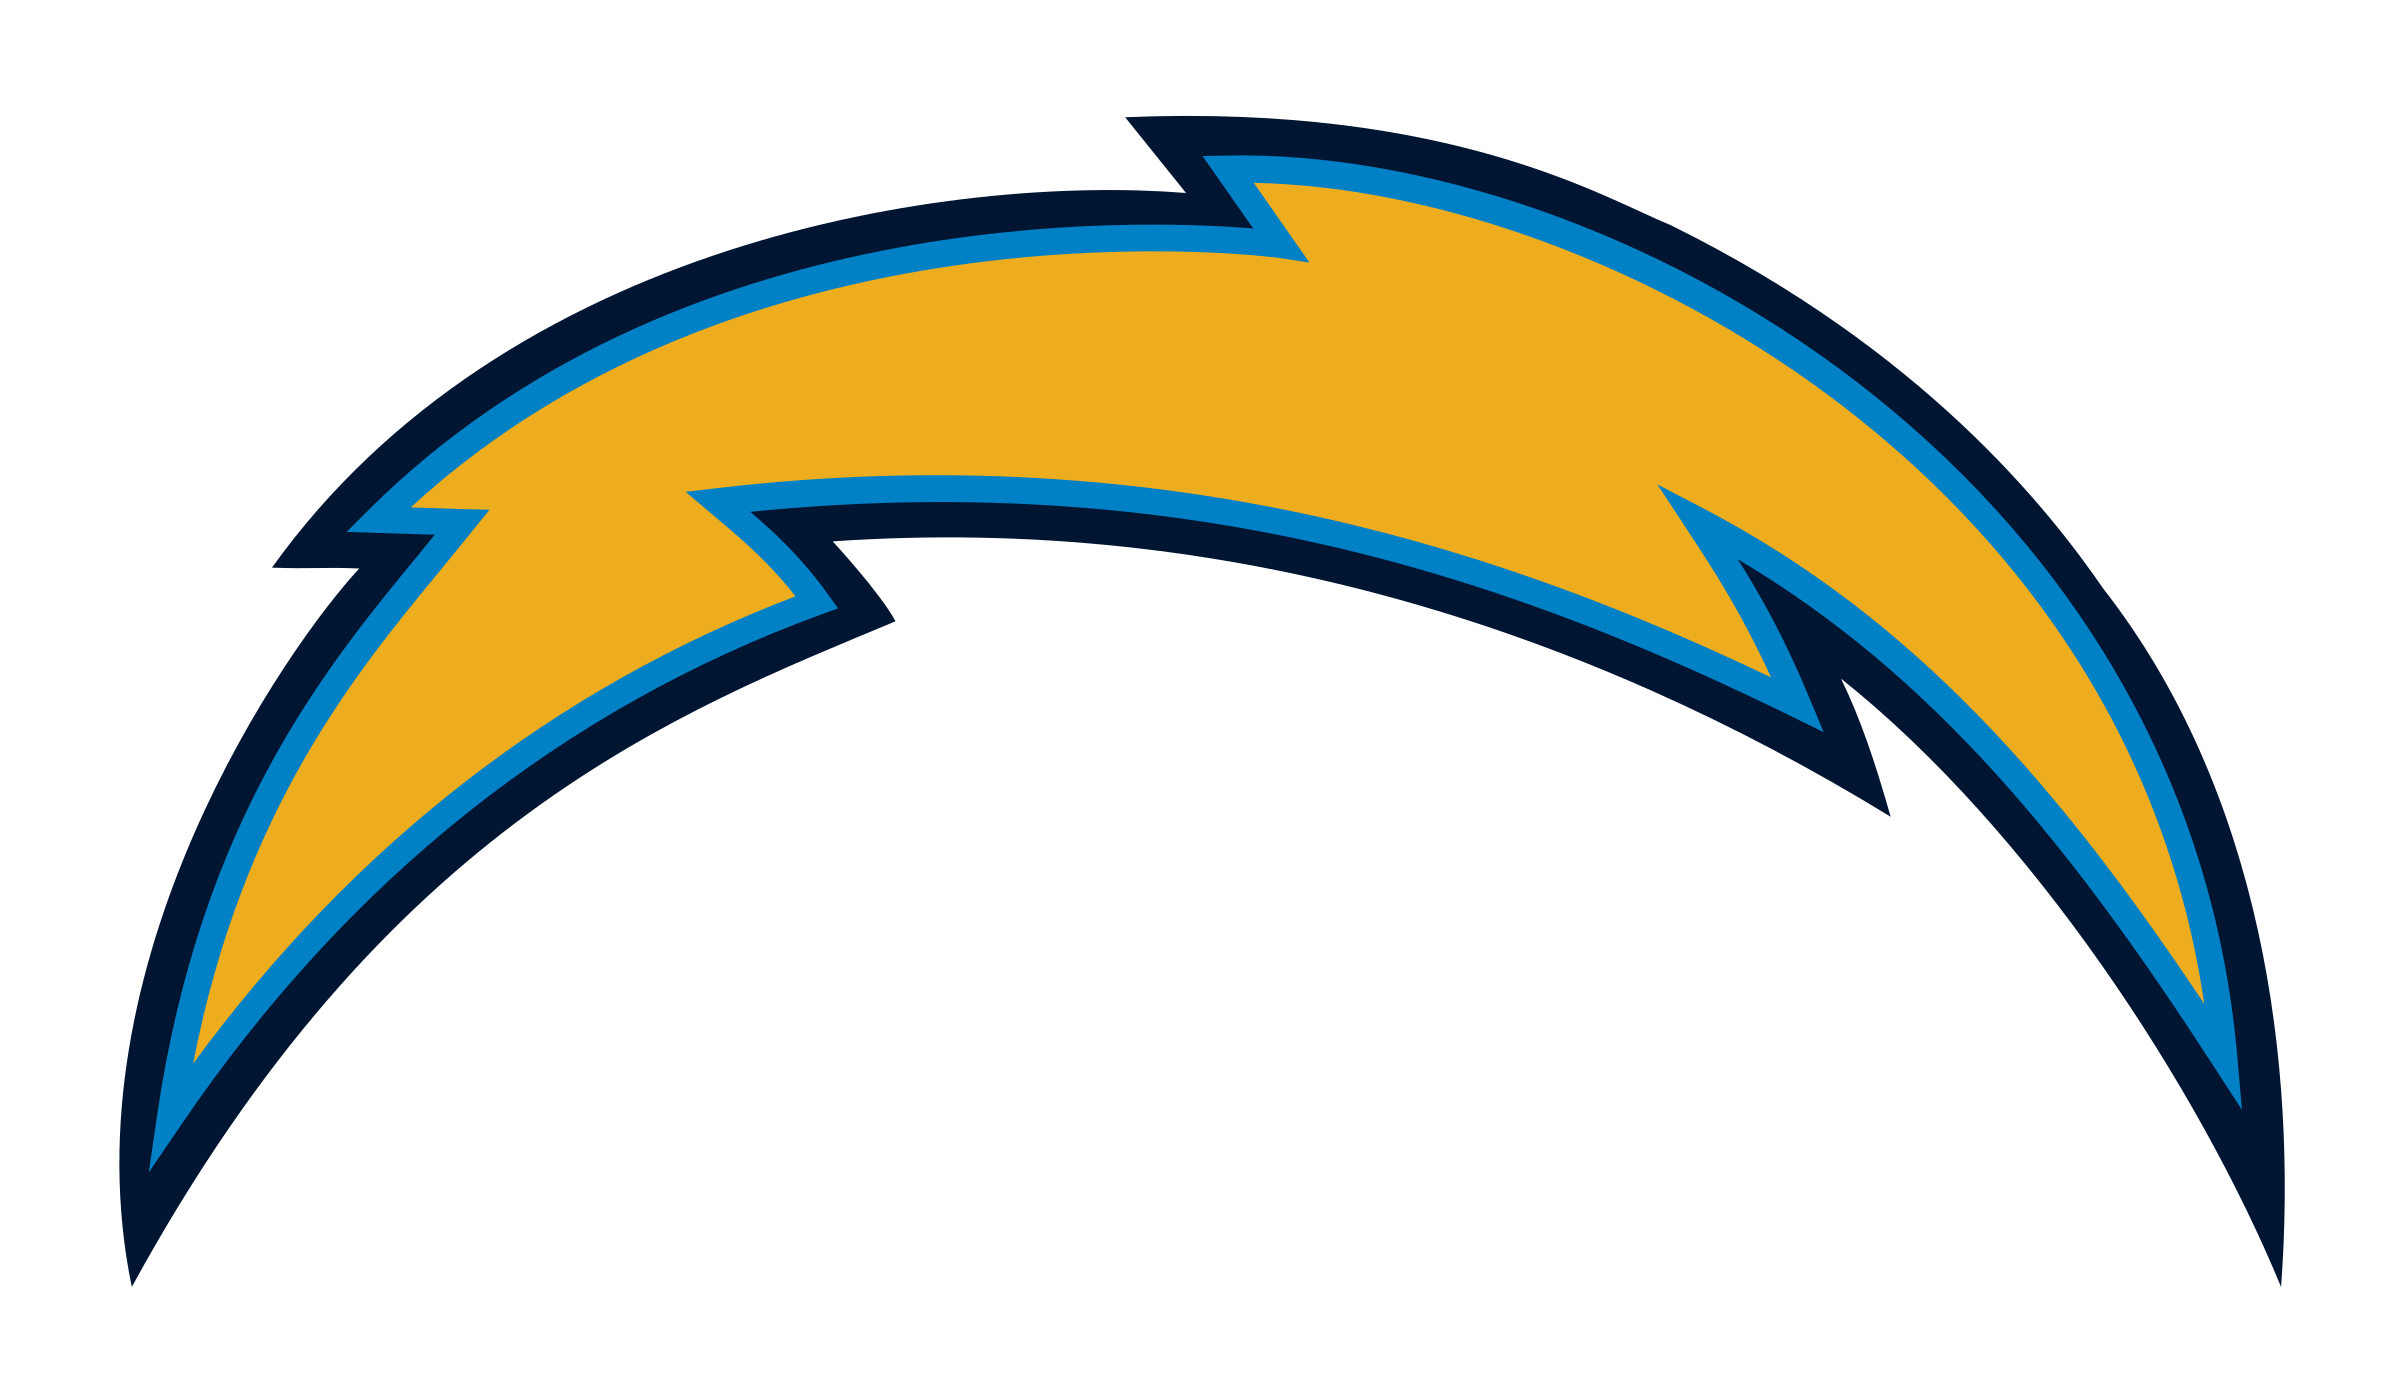 Chargers Logo PNG Photos